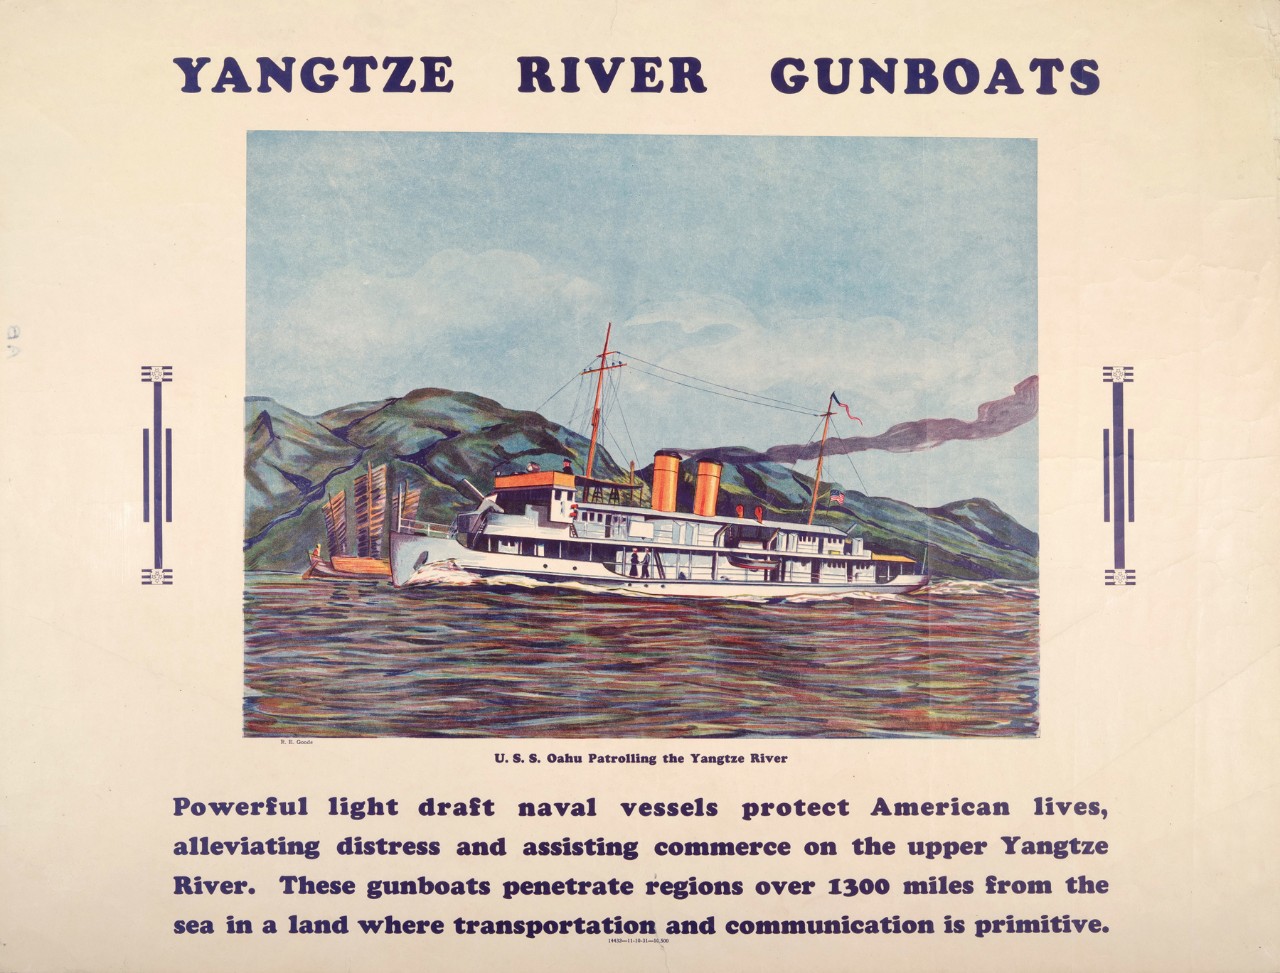 Yangtze River Gunboats: powerful light draft naval vessels protect American lives alleviating distress and assisting commerce on the upper Yangtze River. These gunboats penetrate regions over 1300 miles from the sea in a land where transportation and communication is primitive.